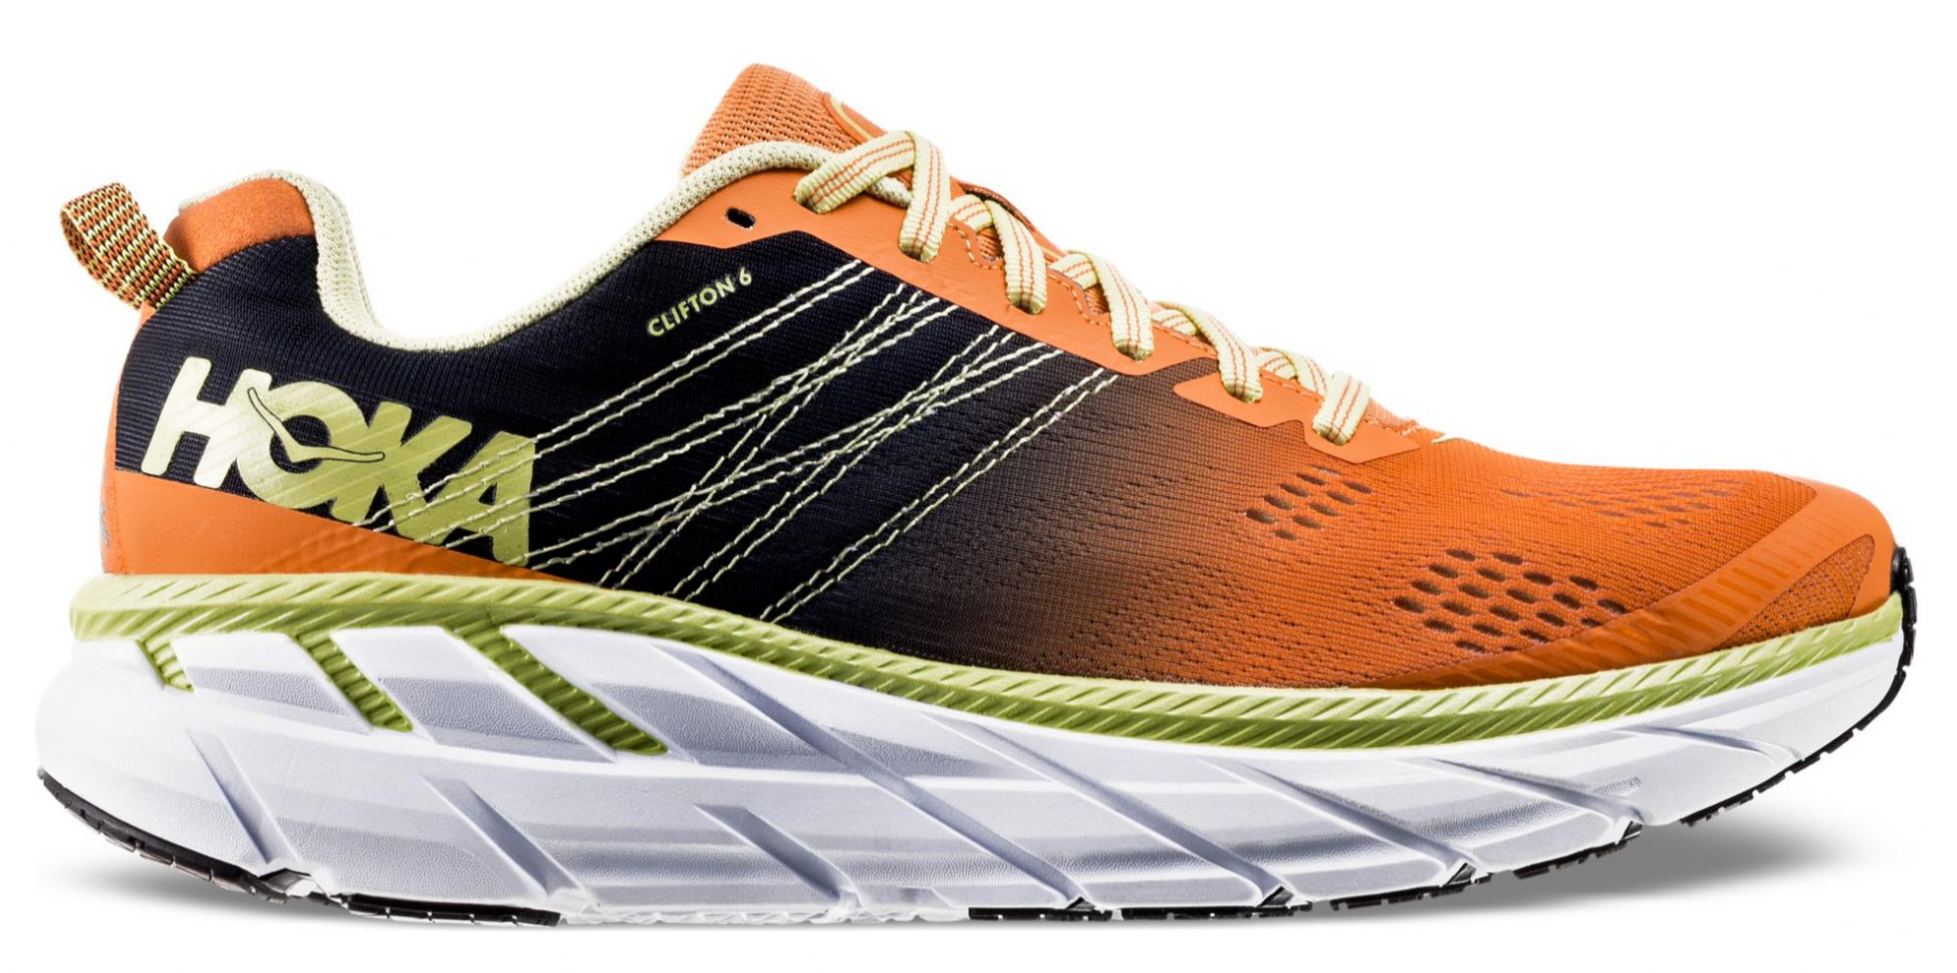 11 Best Men's Running Shoes for Supination